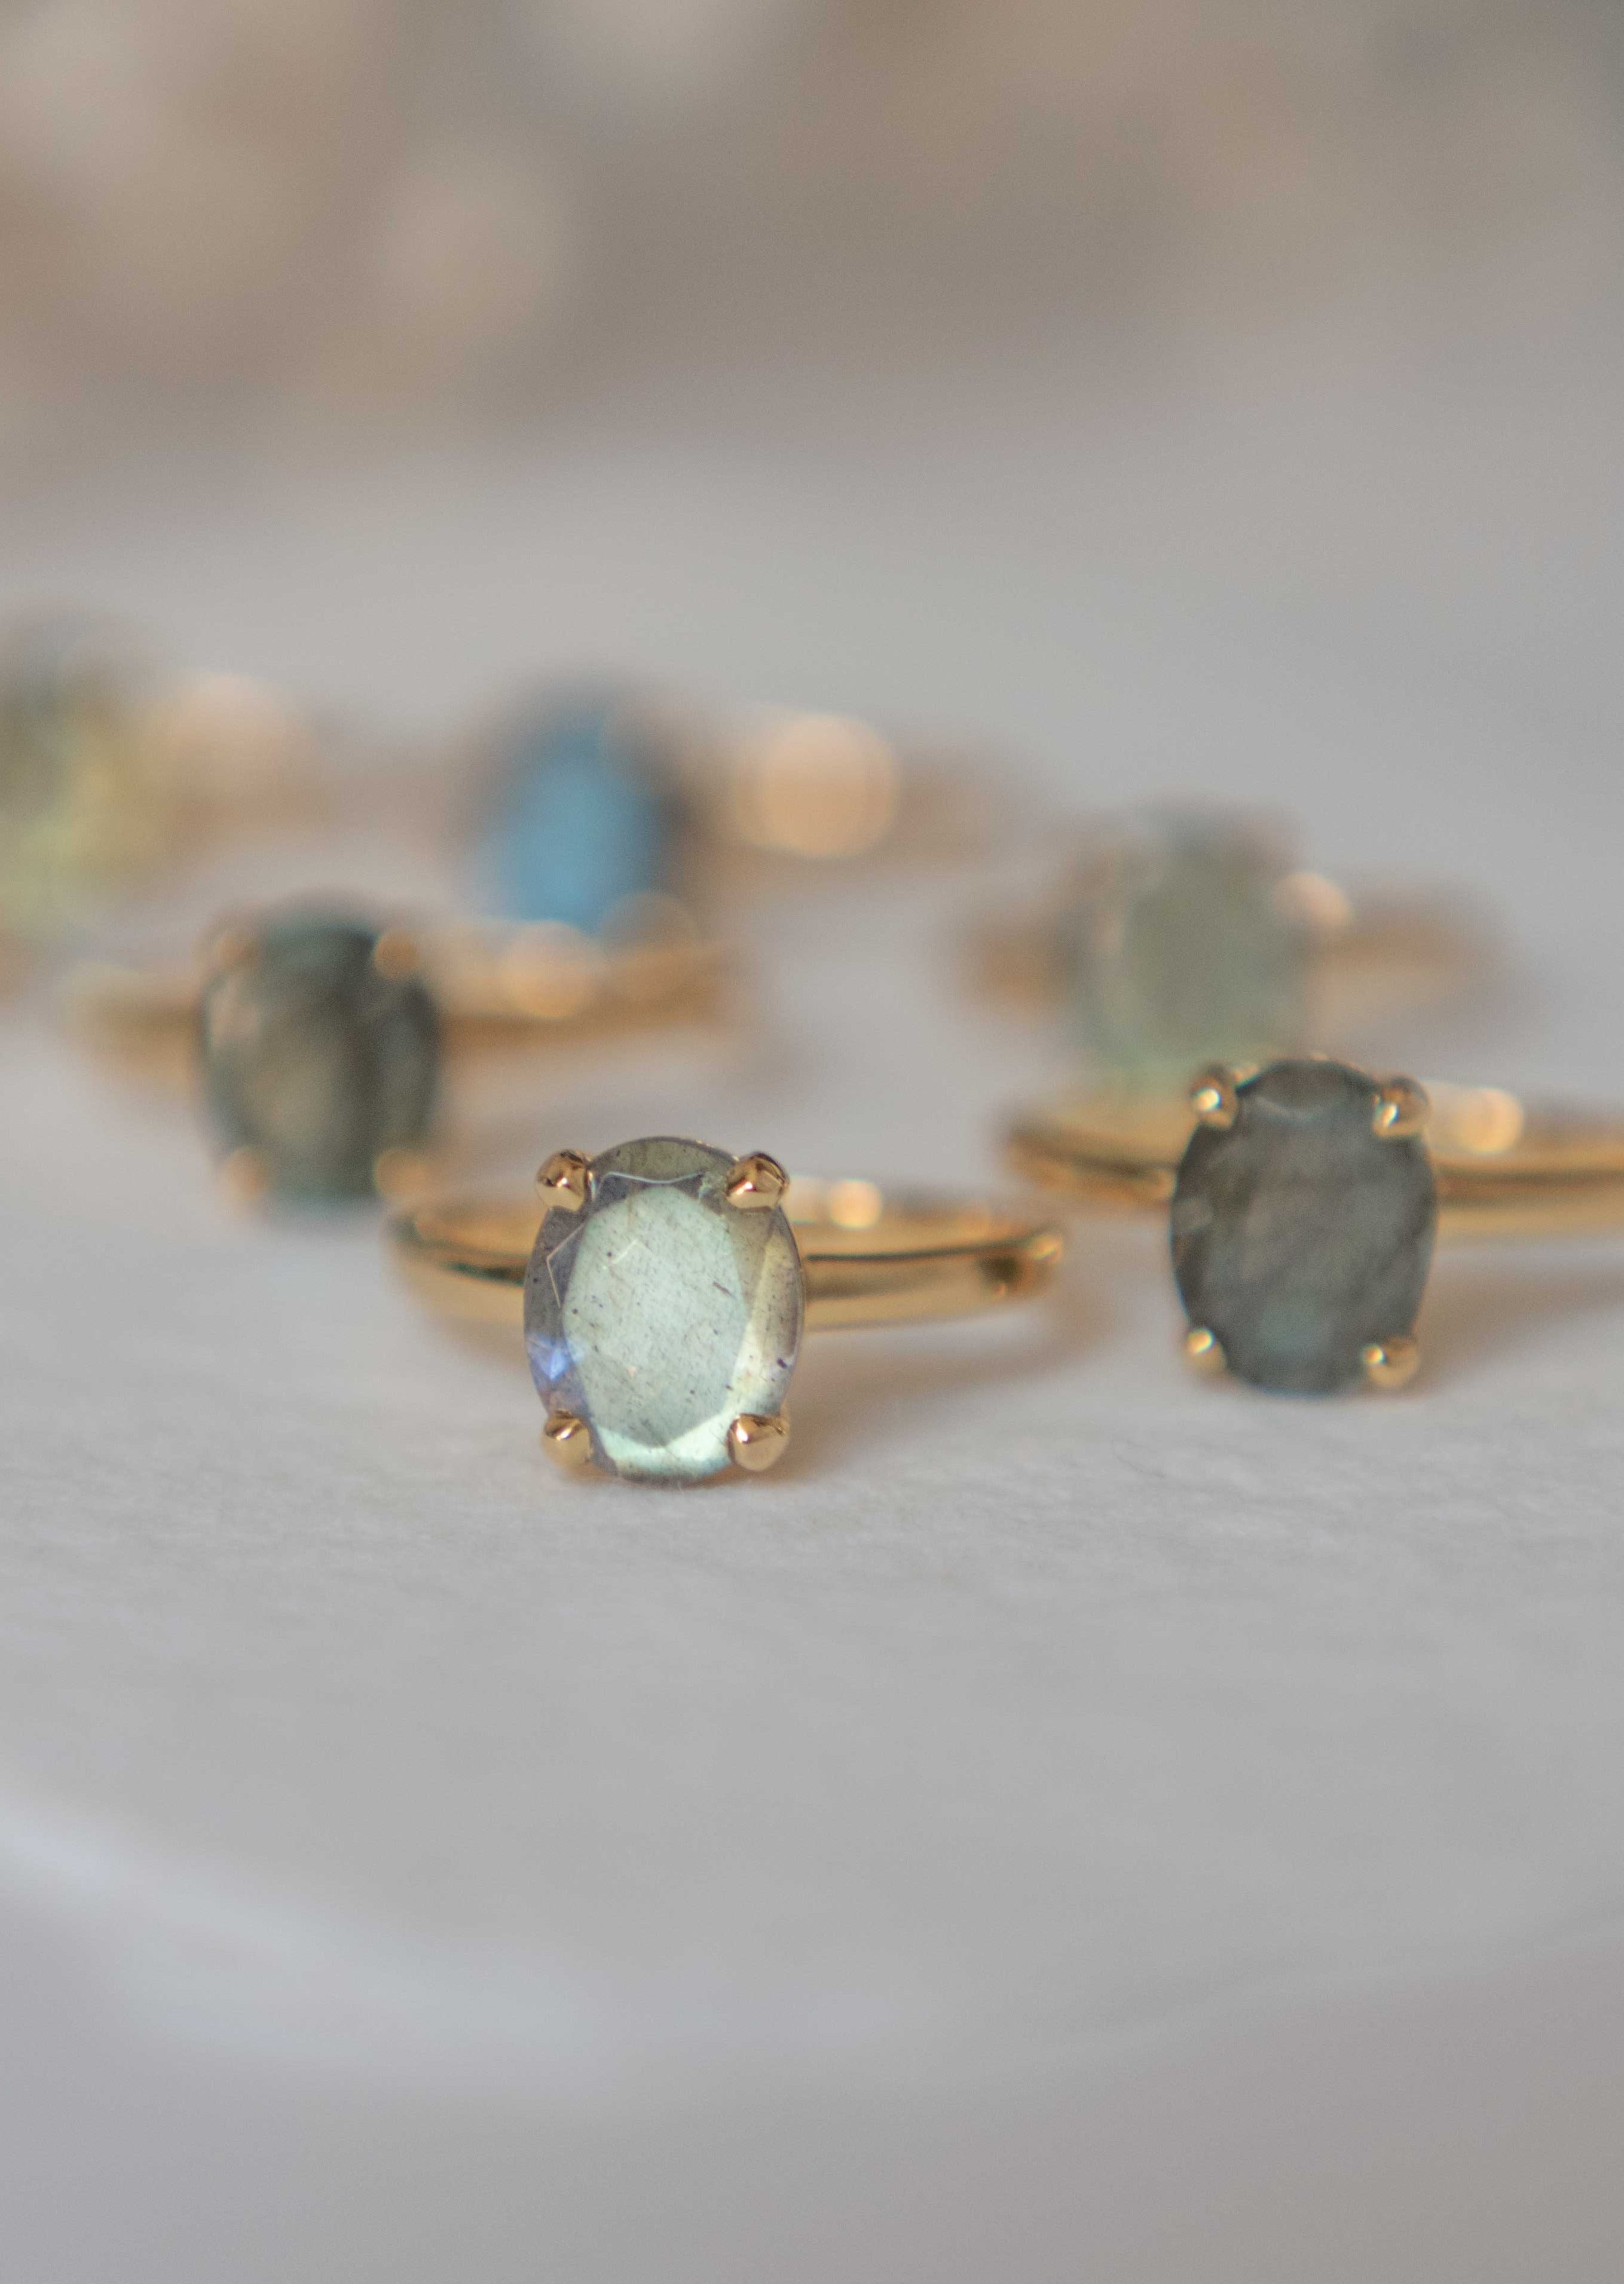 Large Statement Gold Raw Genuine Labradorite Ring in Gold Plated Vermeil Sterling Silver